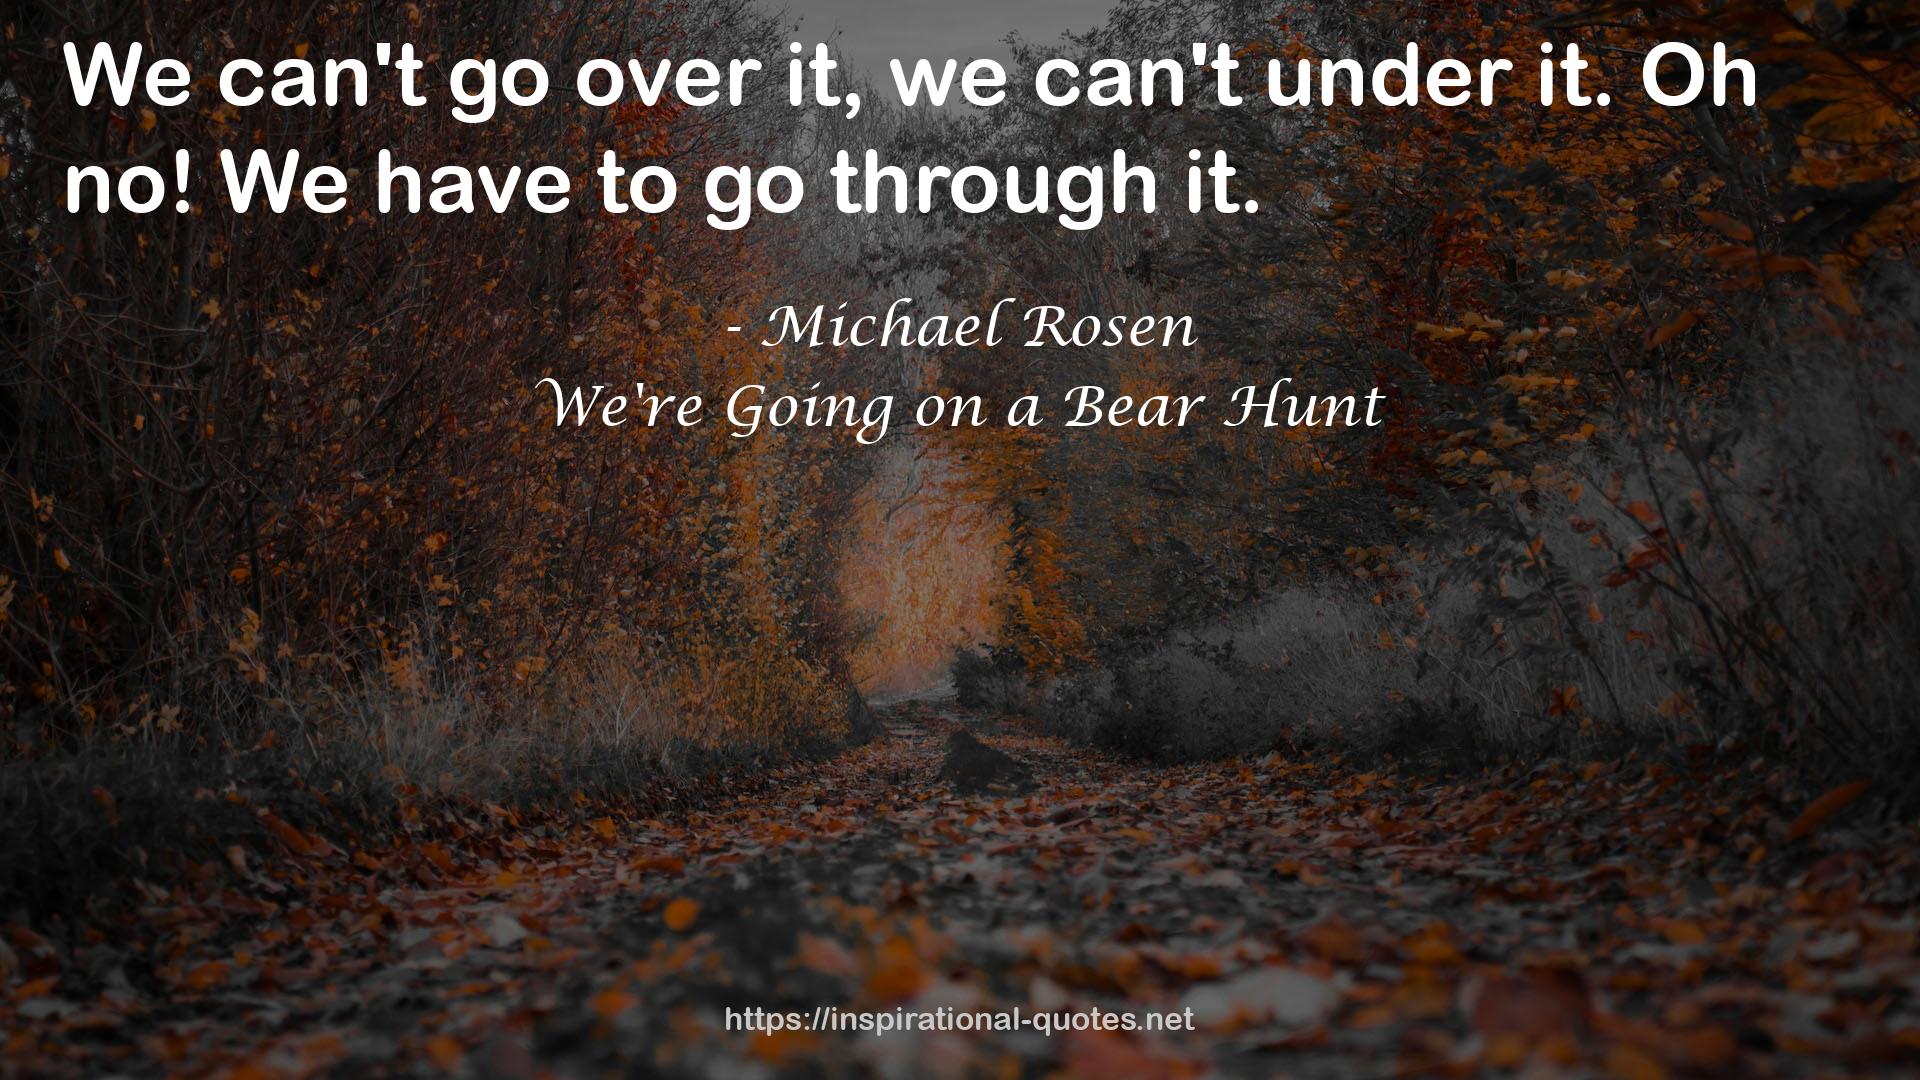 We're Going on a Bear Hunt QUOTES